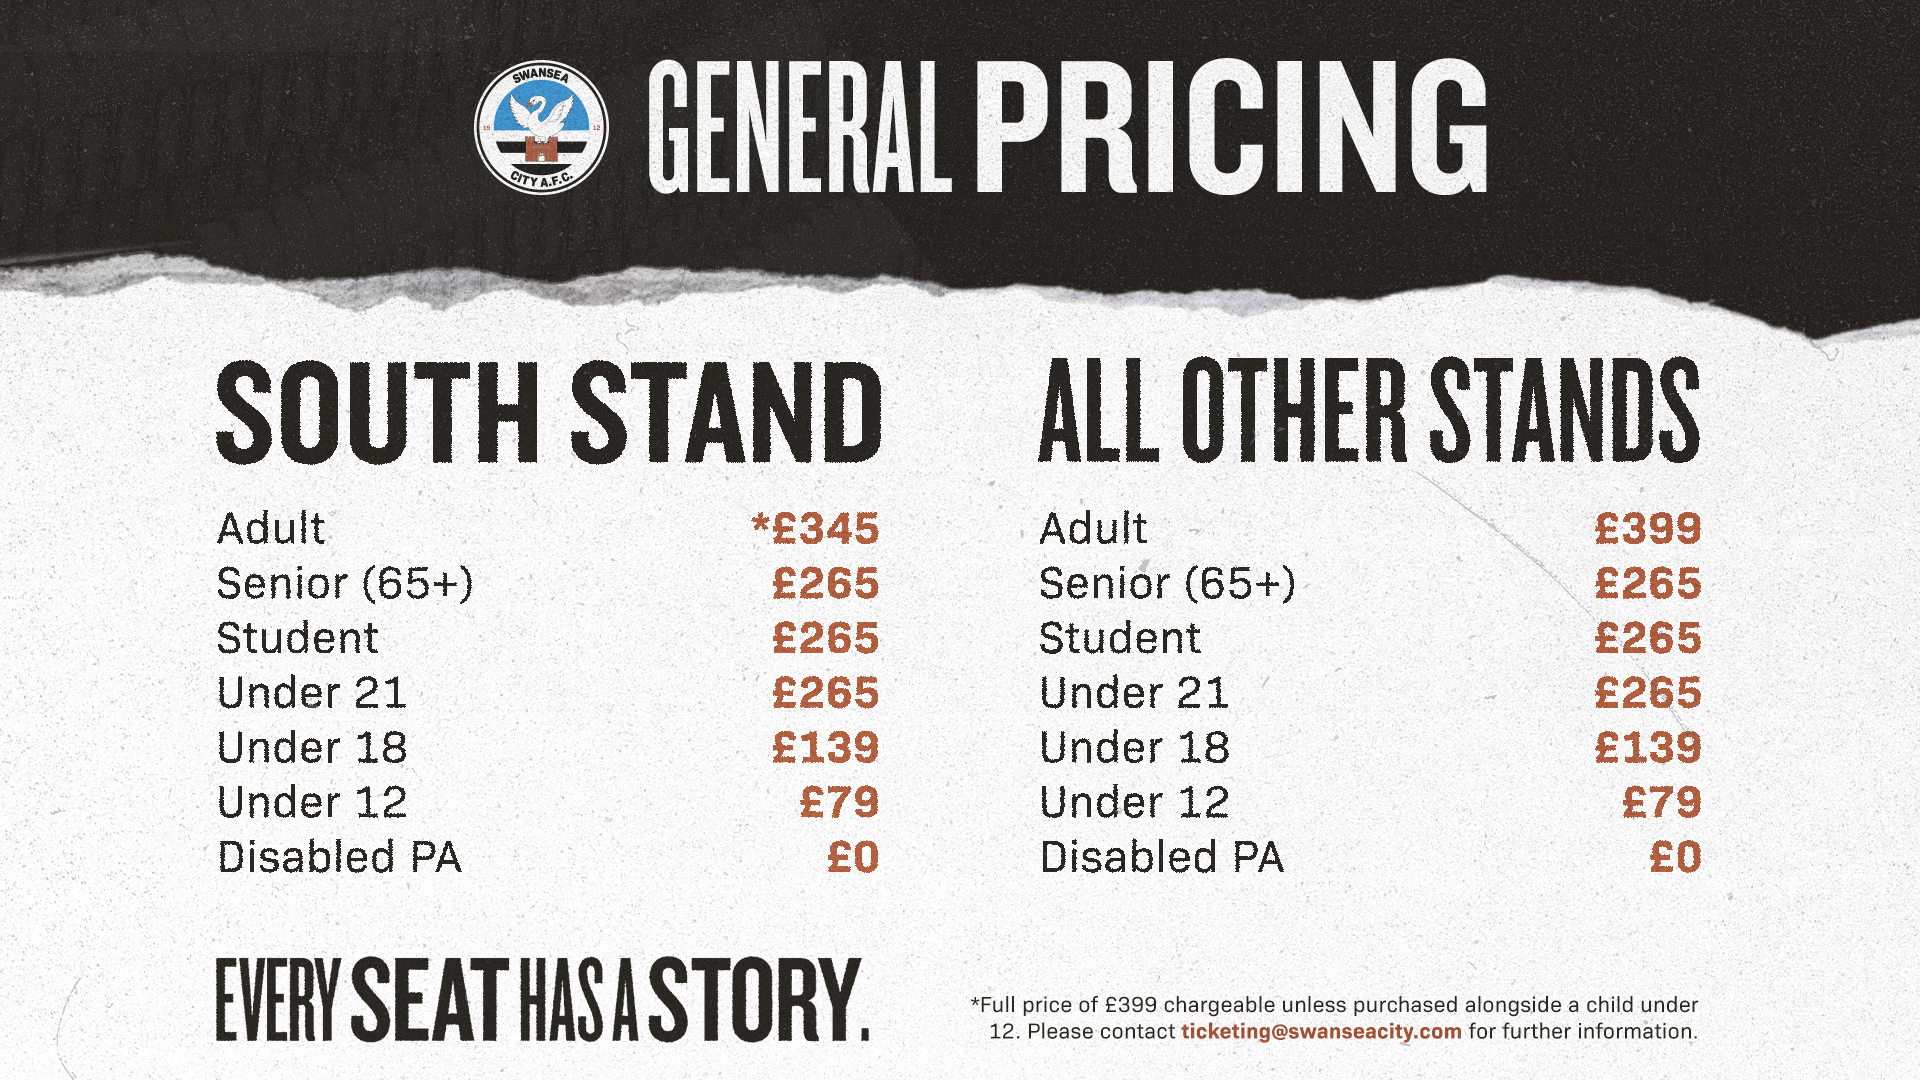 General sale pricing details for the 23-24 season